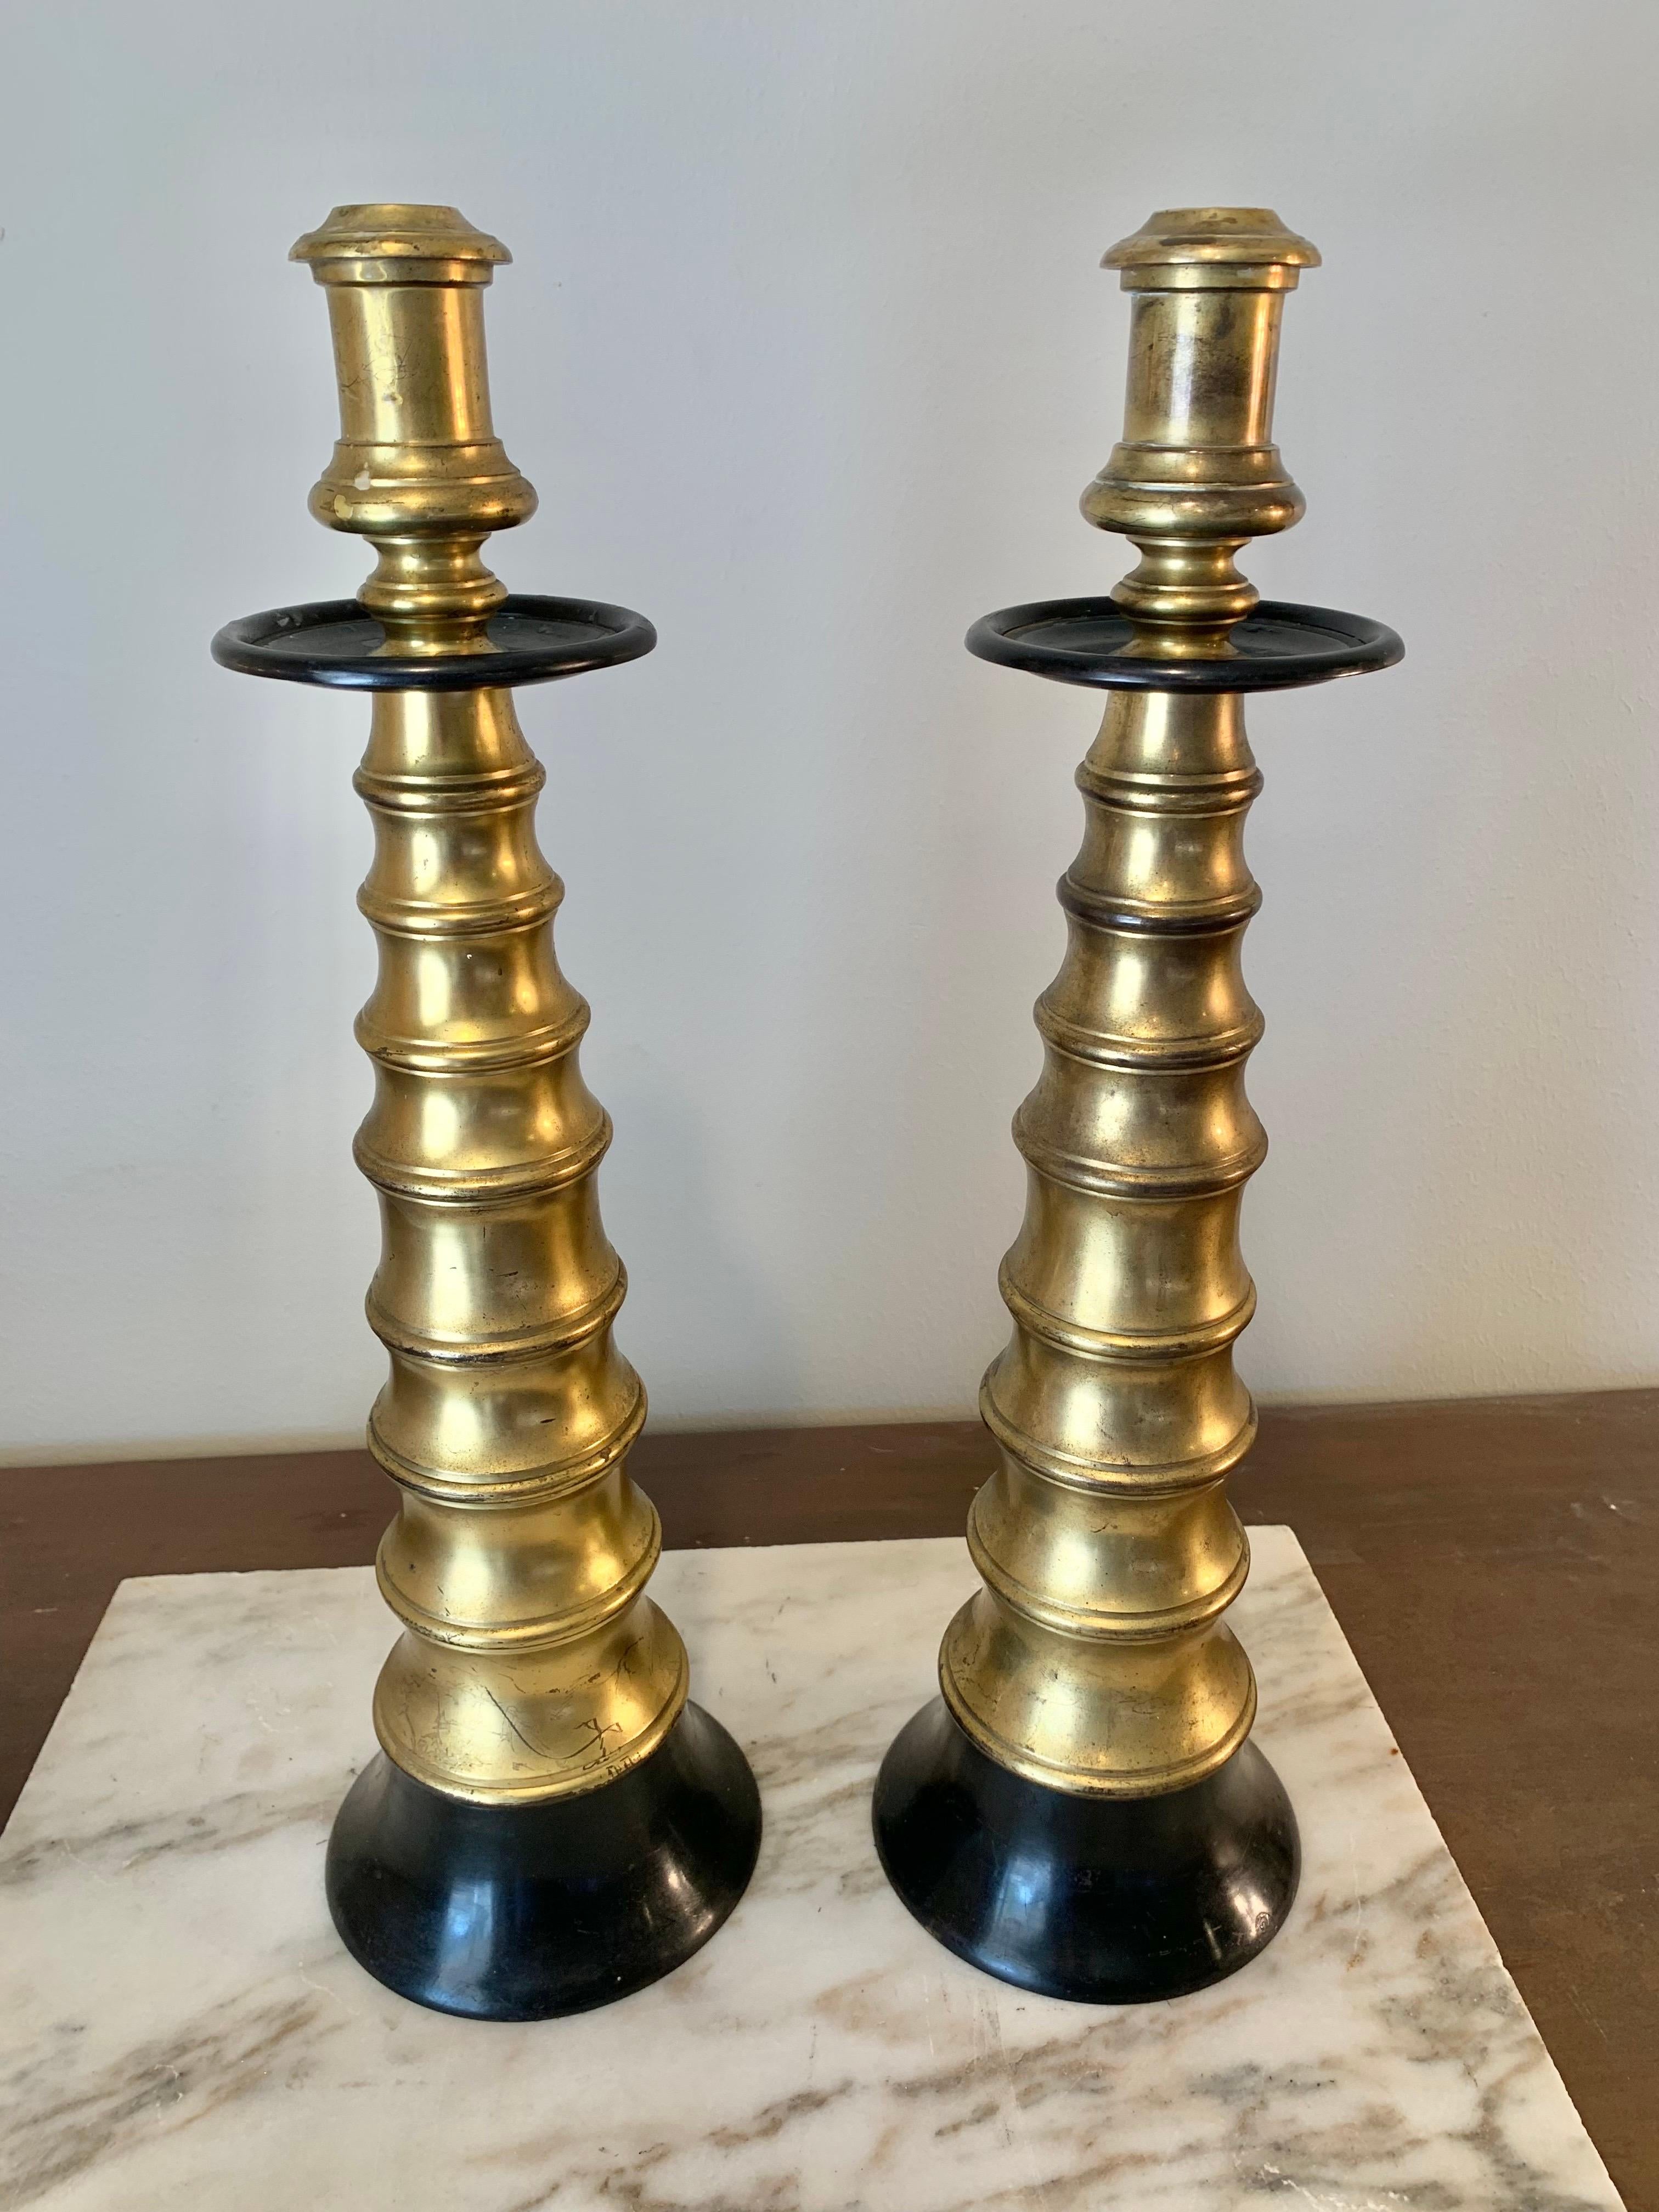 Mid 20th Century Brass and Ebonized Candle Holders - a Pair For Sale 2